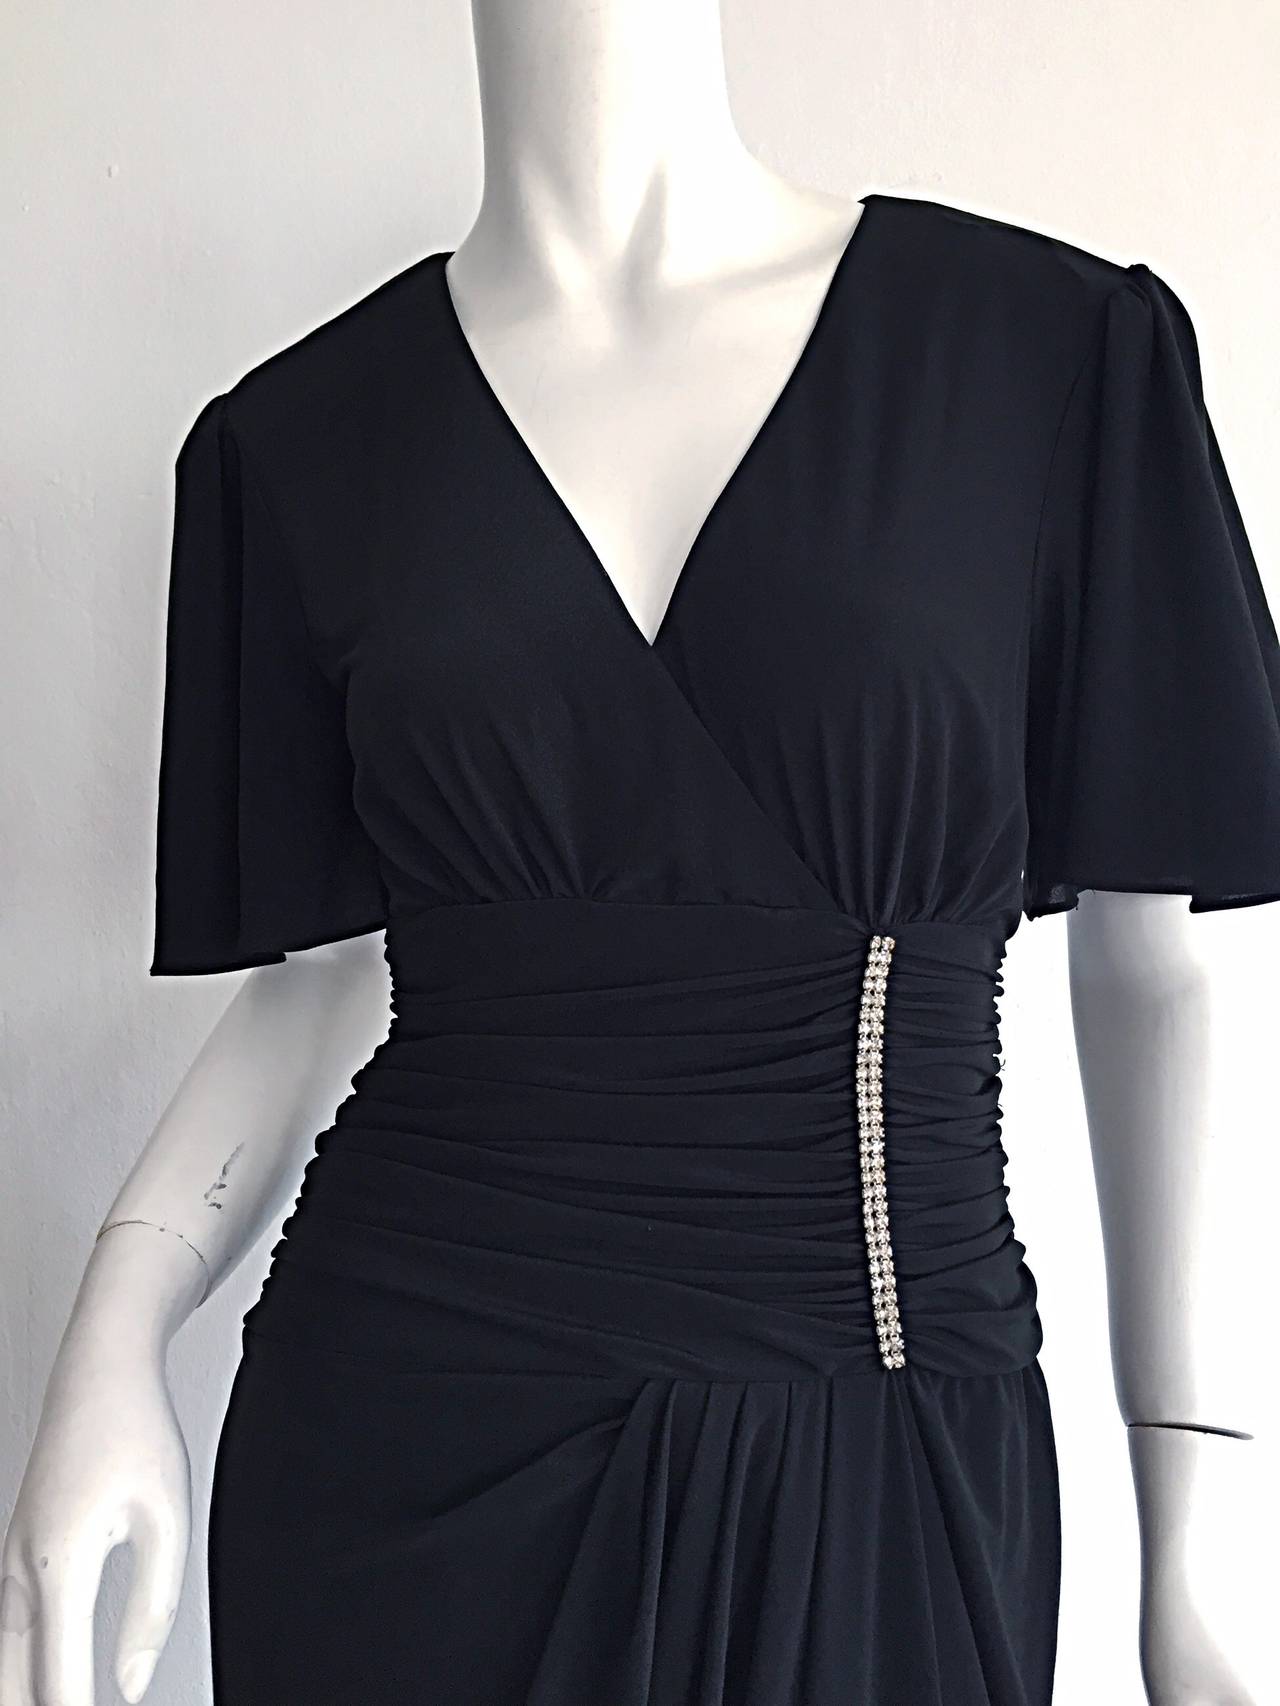 Gorgeous Vintage Neiman Marcus 1940s Style Classic Black Dress w/ Rhinestones In Excellent Condition For Sale In San Diego, CA